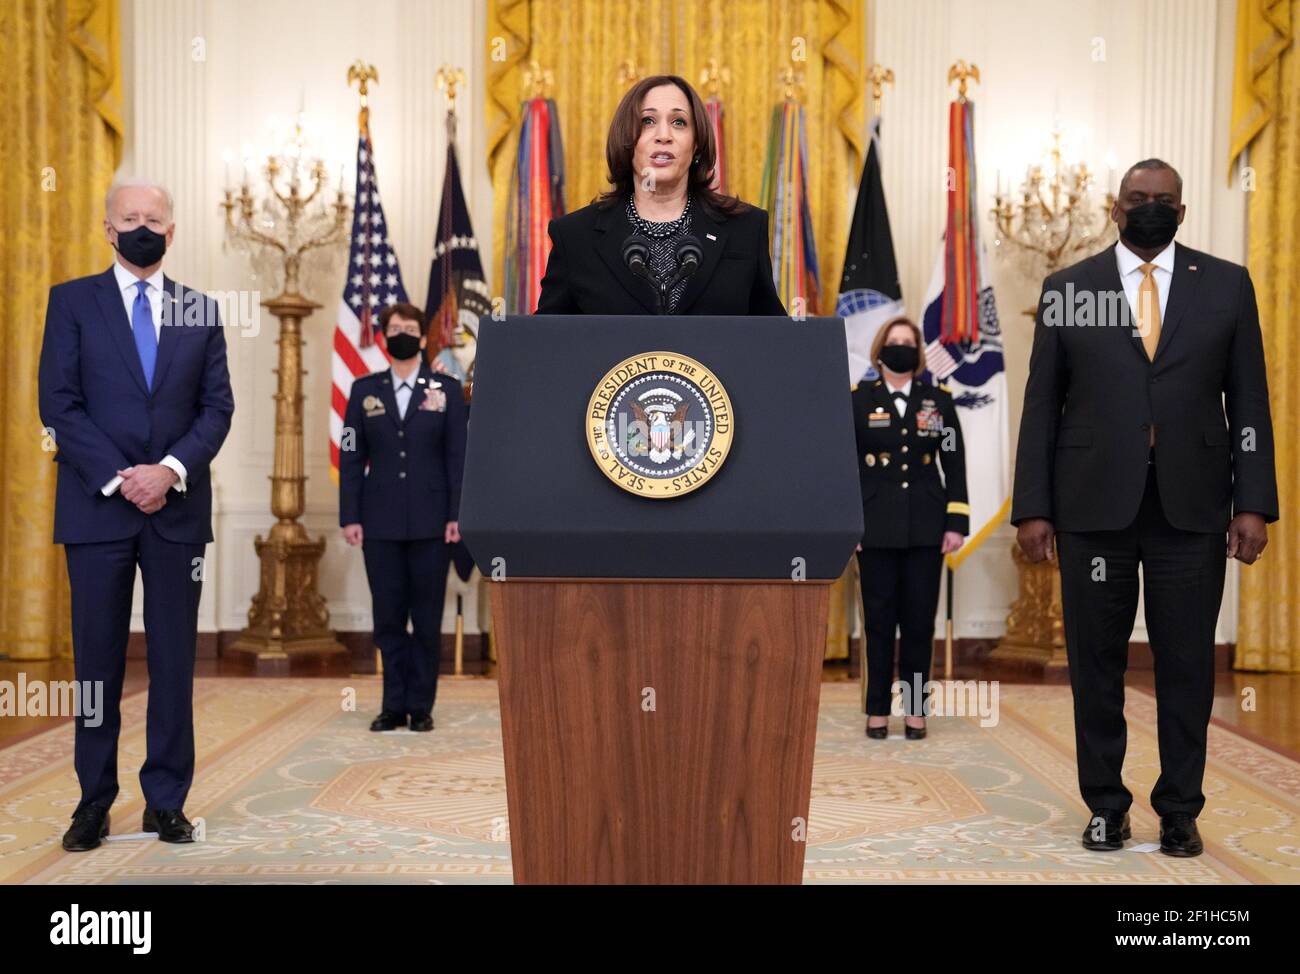 Washington, United States. 08th Mar, 2021. Vice President Kamala Harris delivers remarks at President Joe Biden's Combatant Commander nomination event for, Air Force Gen. Jacqueline Van Ovost and Army Lt. Gen. Laura Richardson in the East Room at the White House in Washington, DC on Monday, March 8, 2021. Ovost, has been nominated to lead the Transportation Command and Richardson, has been nominated to lead military activities in Latin America at Southern Command. Defense Secretary Lloyd Austin also attended. Photo by Kevin Dietsch/UPI Credit: UPI/Alamy Live News Stock Photo